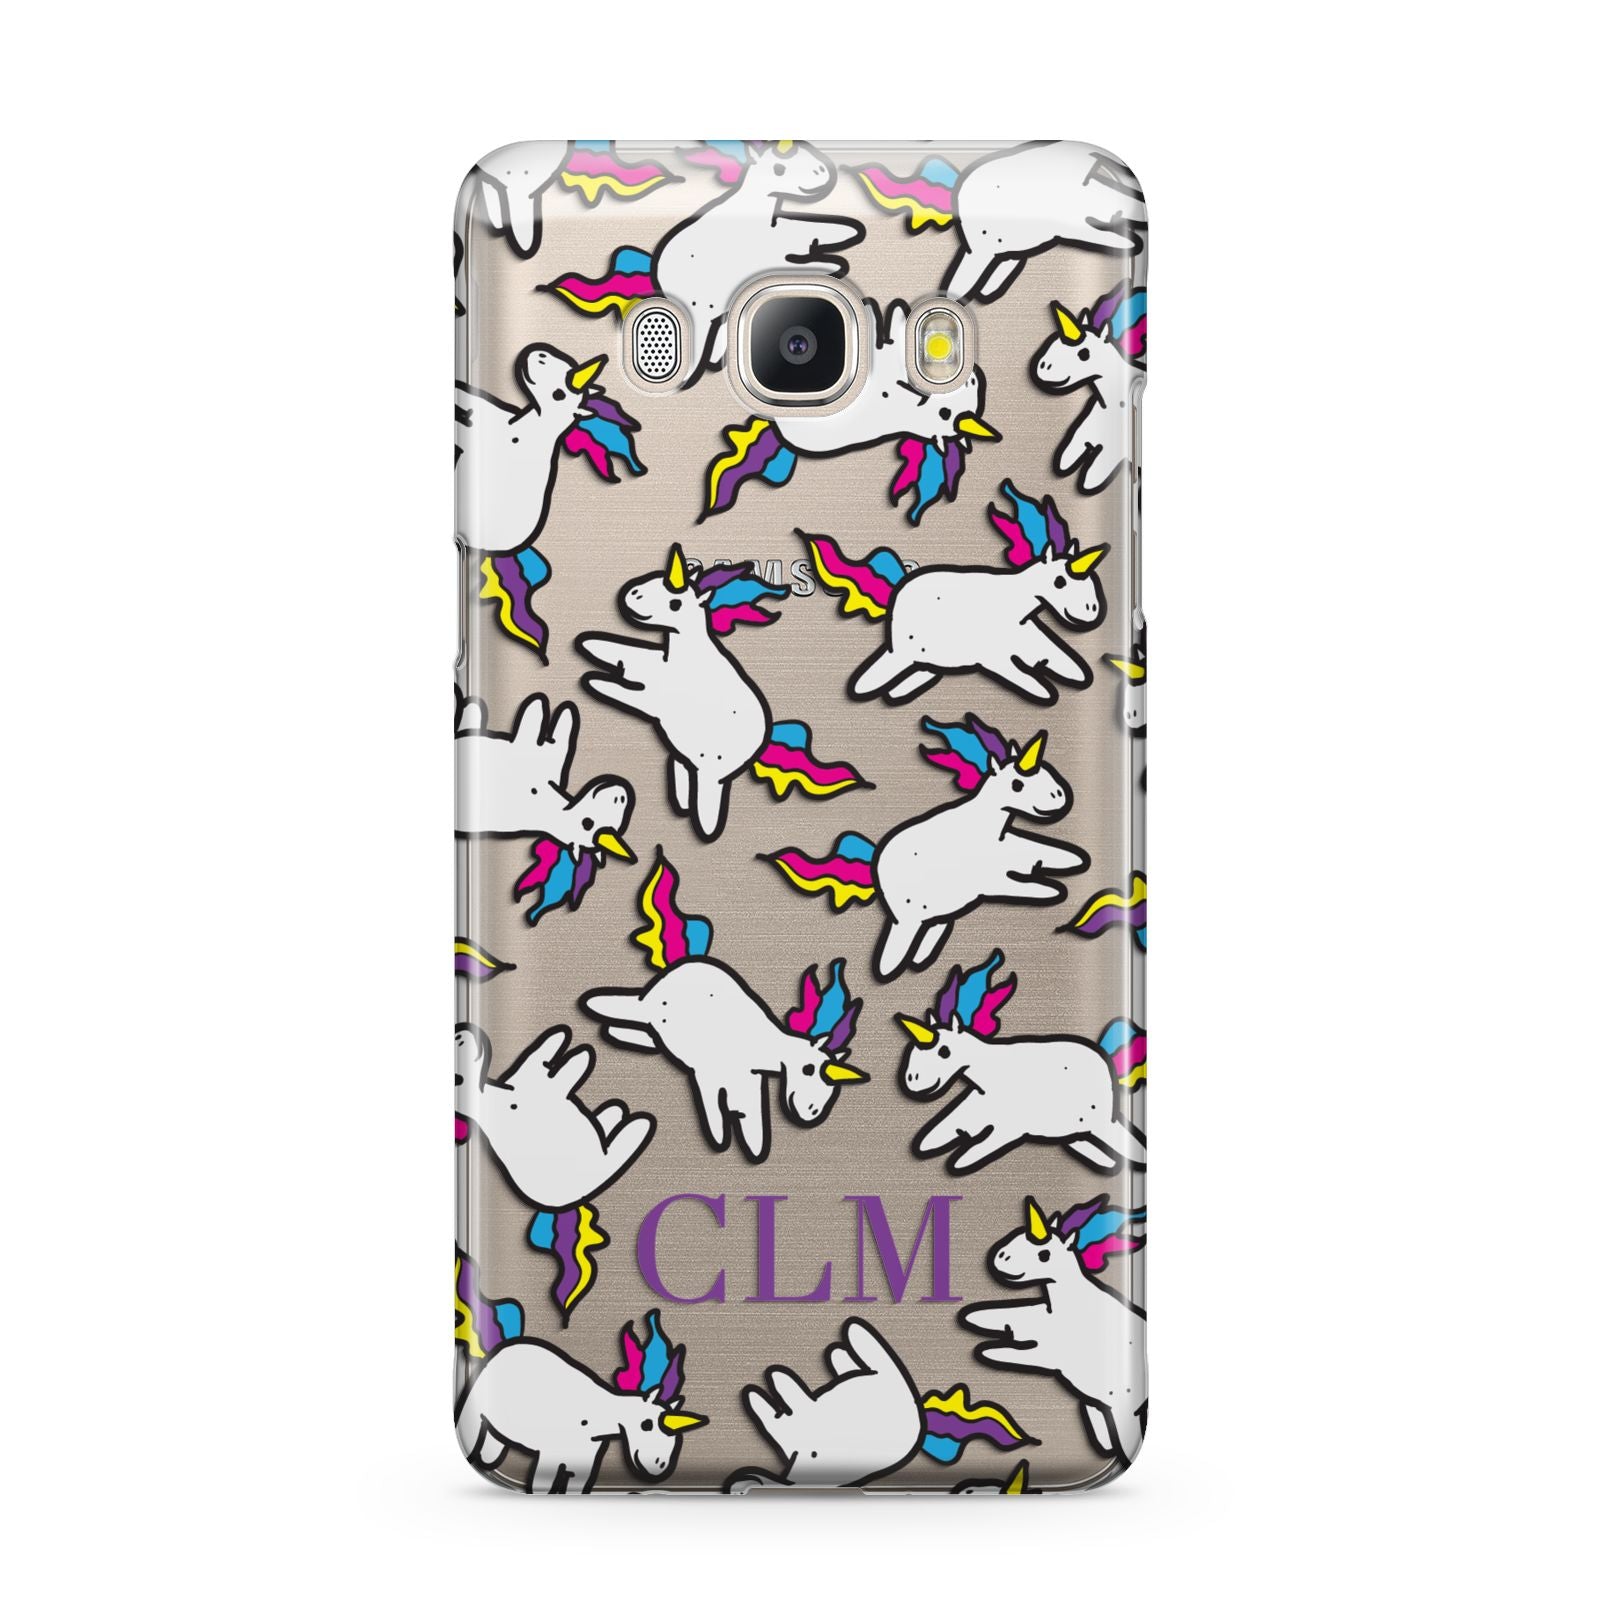 Personalised Unicorn With Initials Samsung Galaxy J5 2016 Case